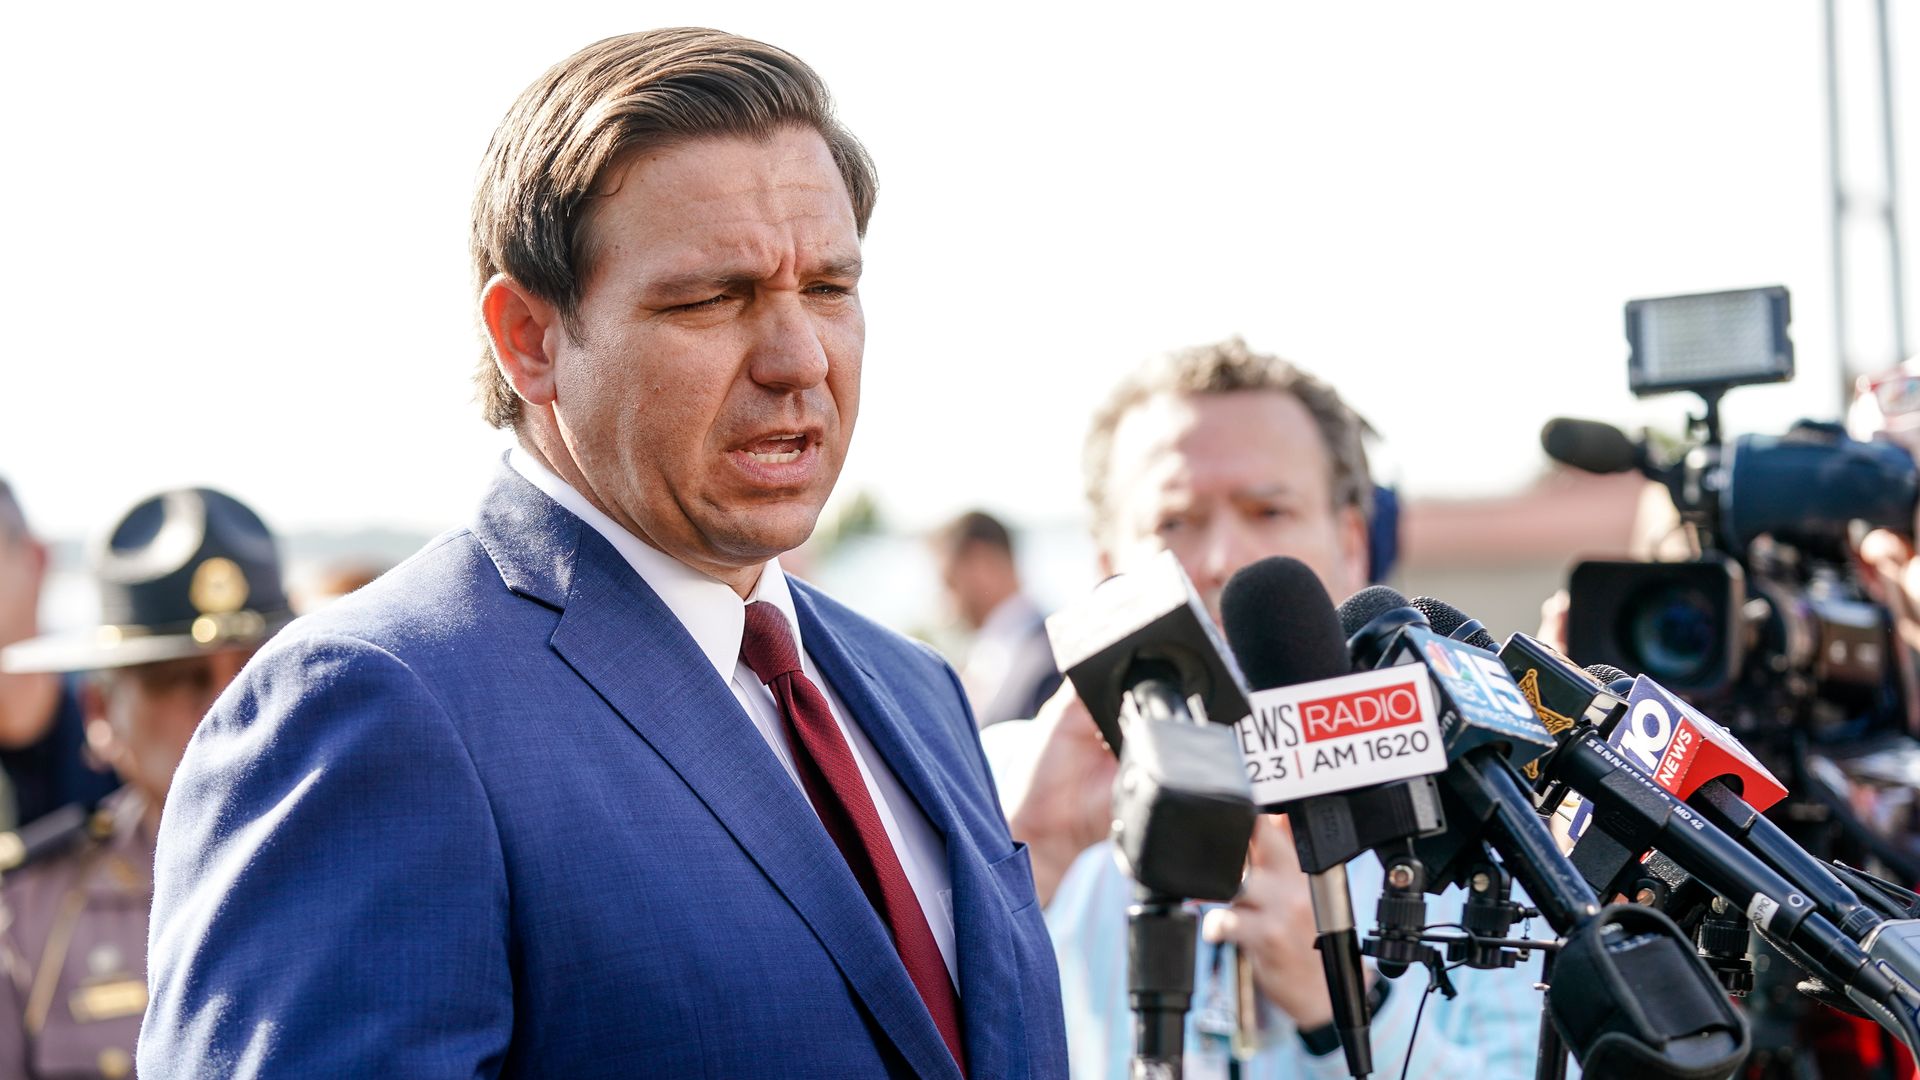 In this image, Ron DeSantis stands in a suit and tie and speaks into multiple reporters' microphones while standing outside.